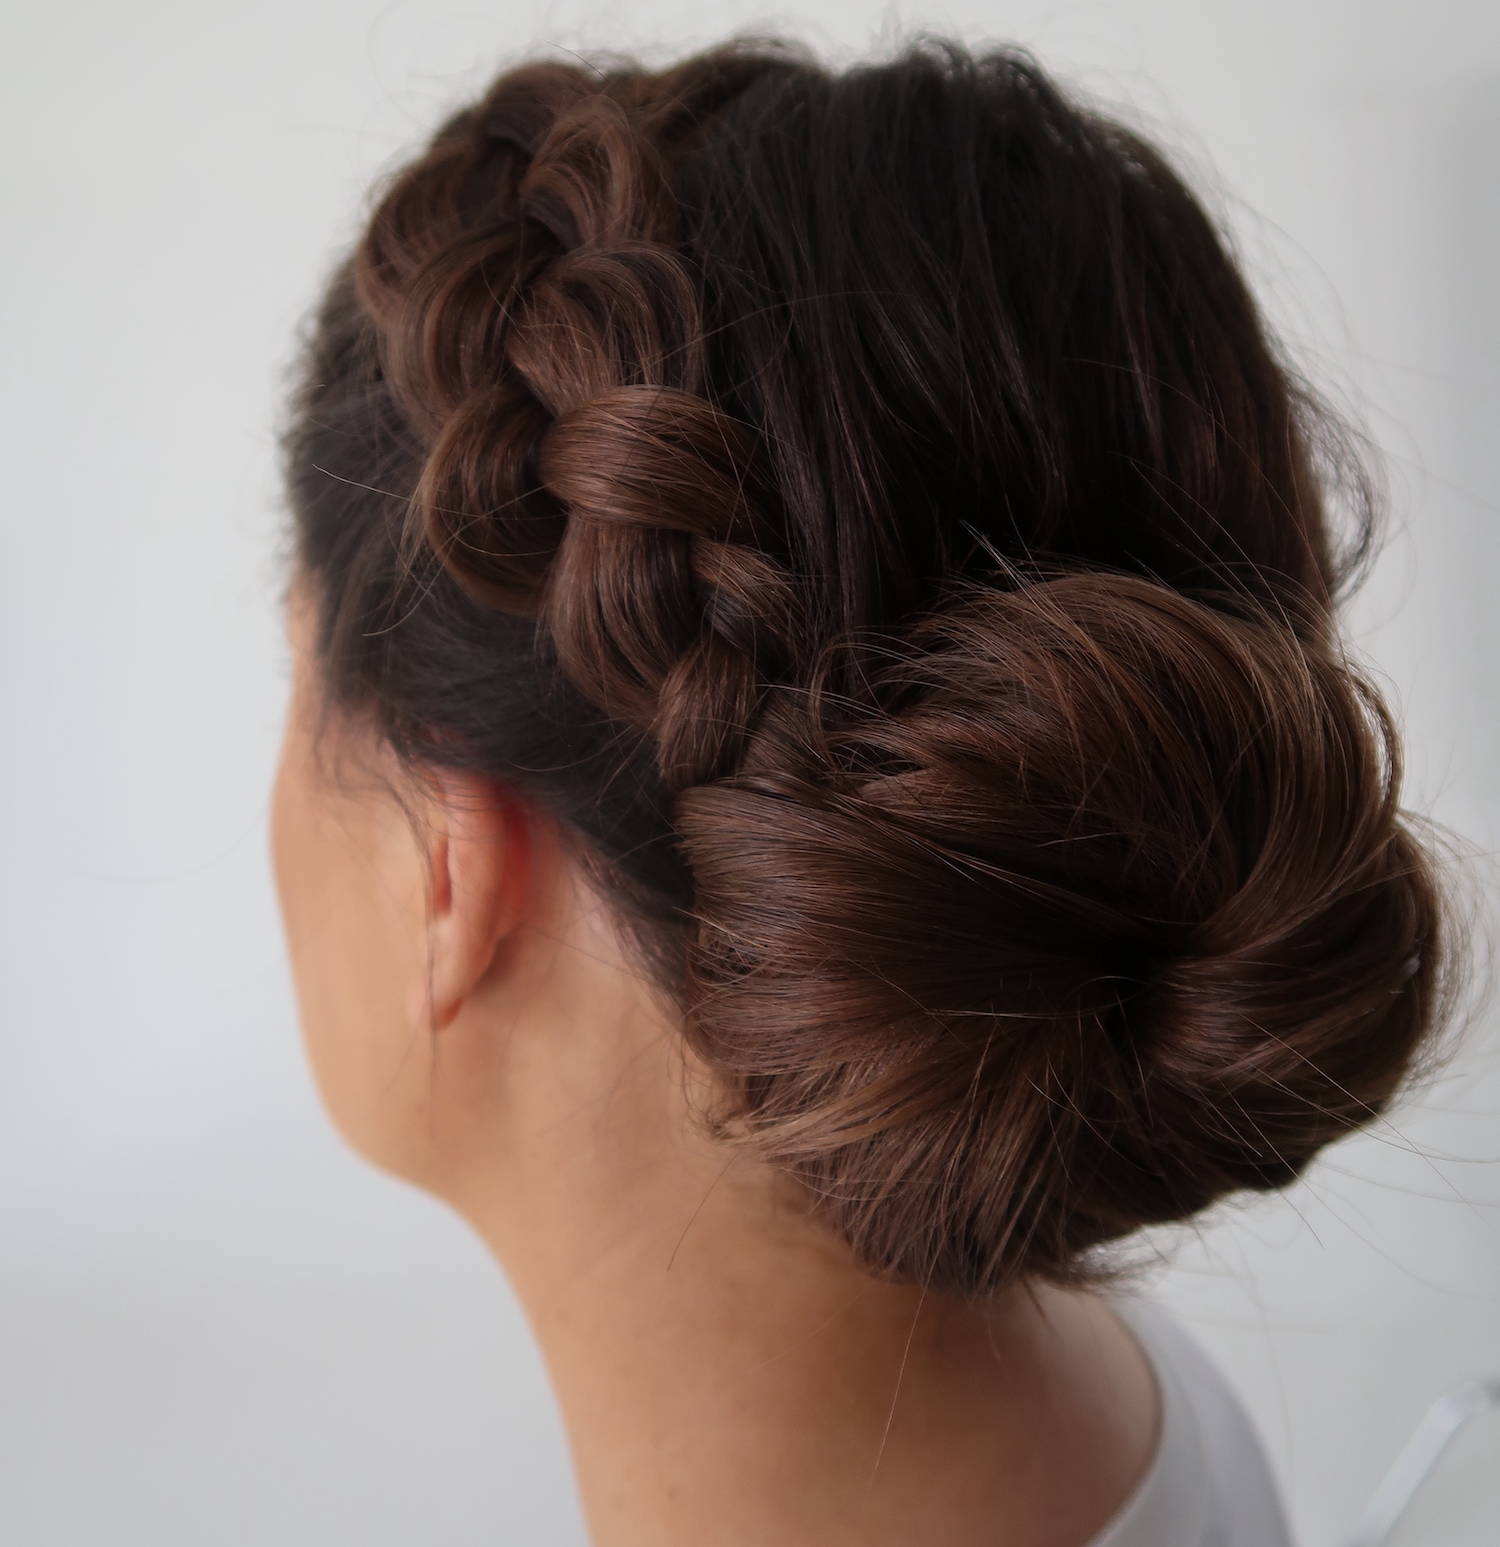 5 Super Easy Hairstyles for Bad Hair Days 